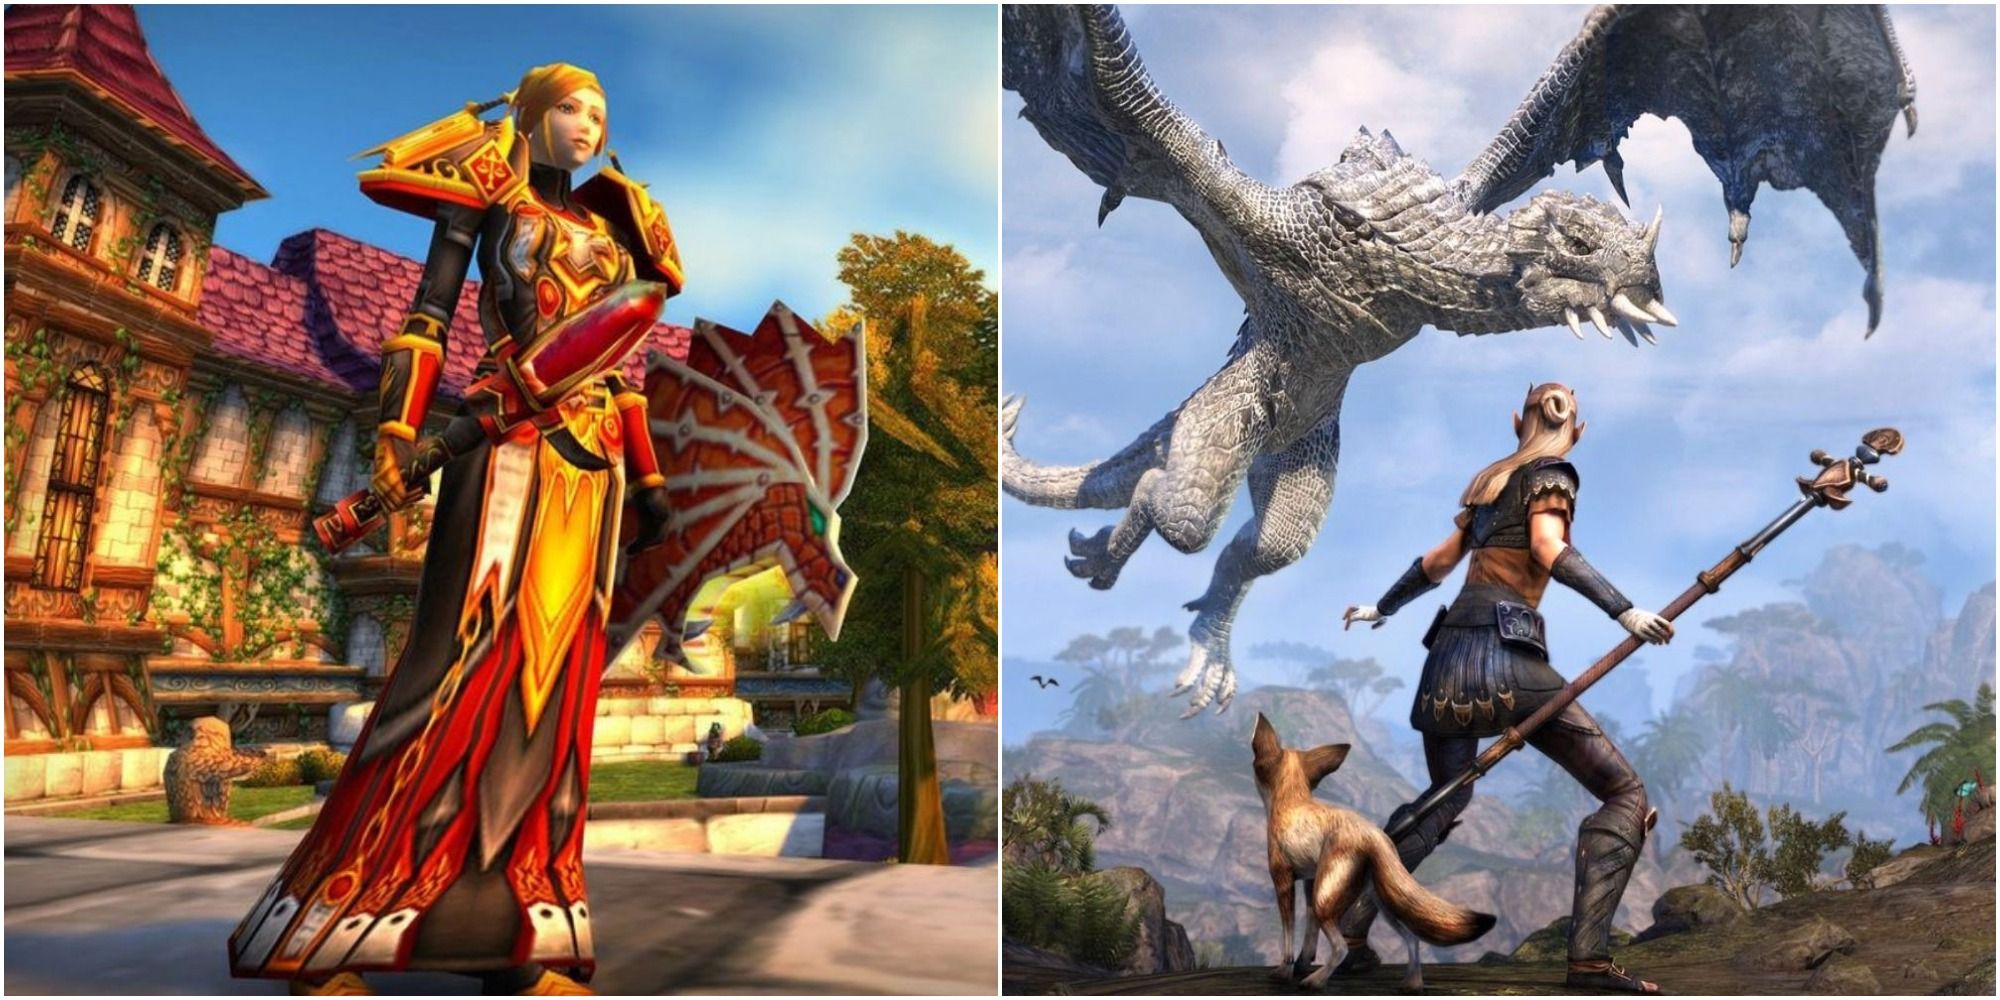 15 Of The Best Single-Player Games To Play If You Love MMORPGs